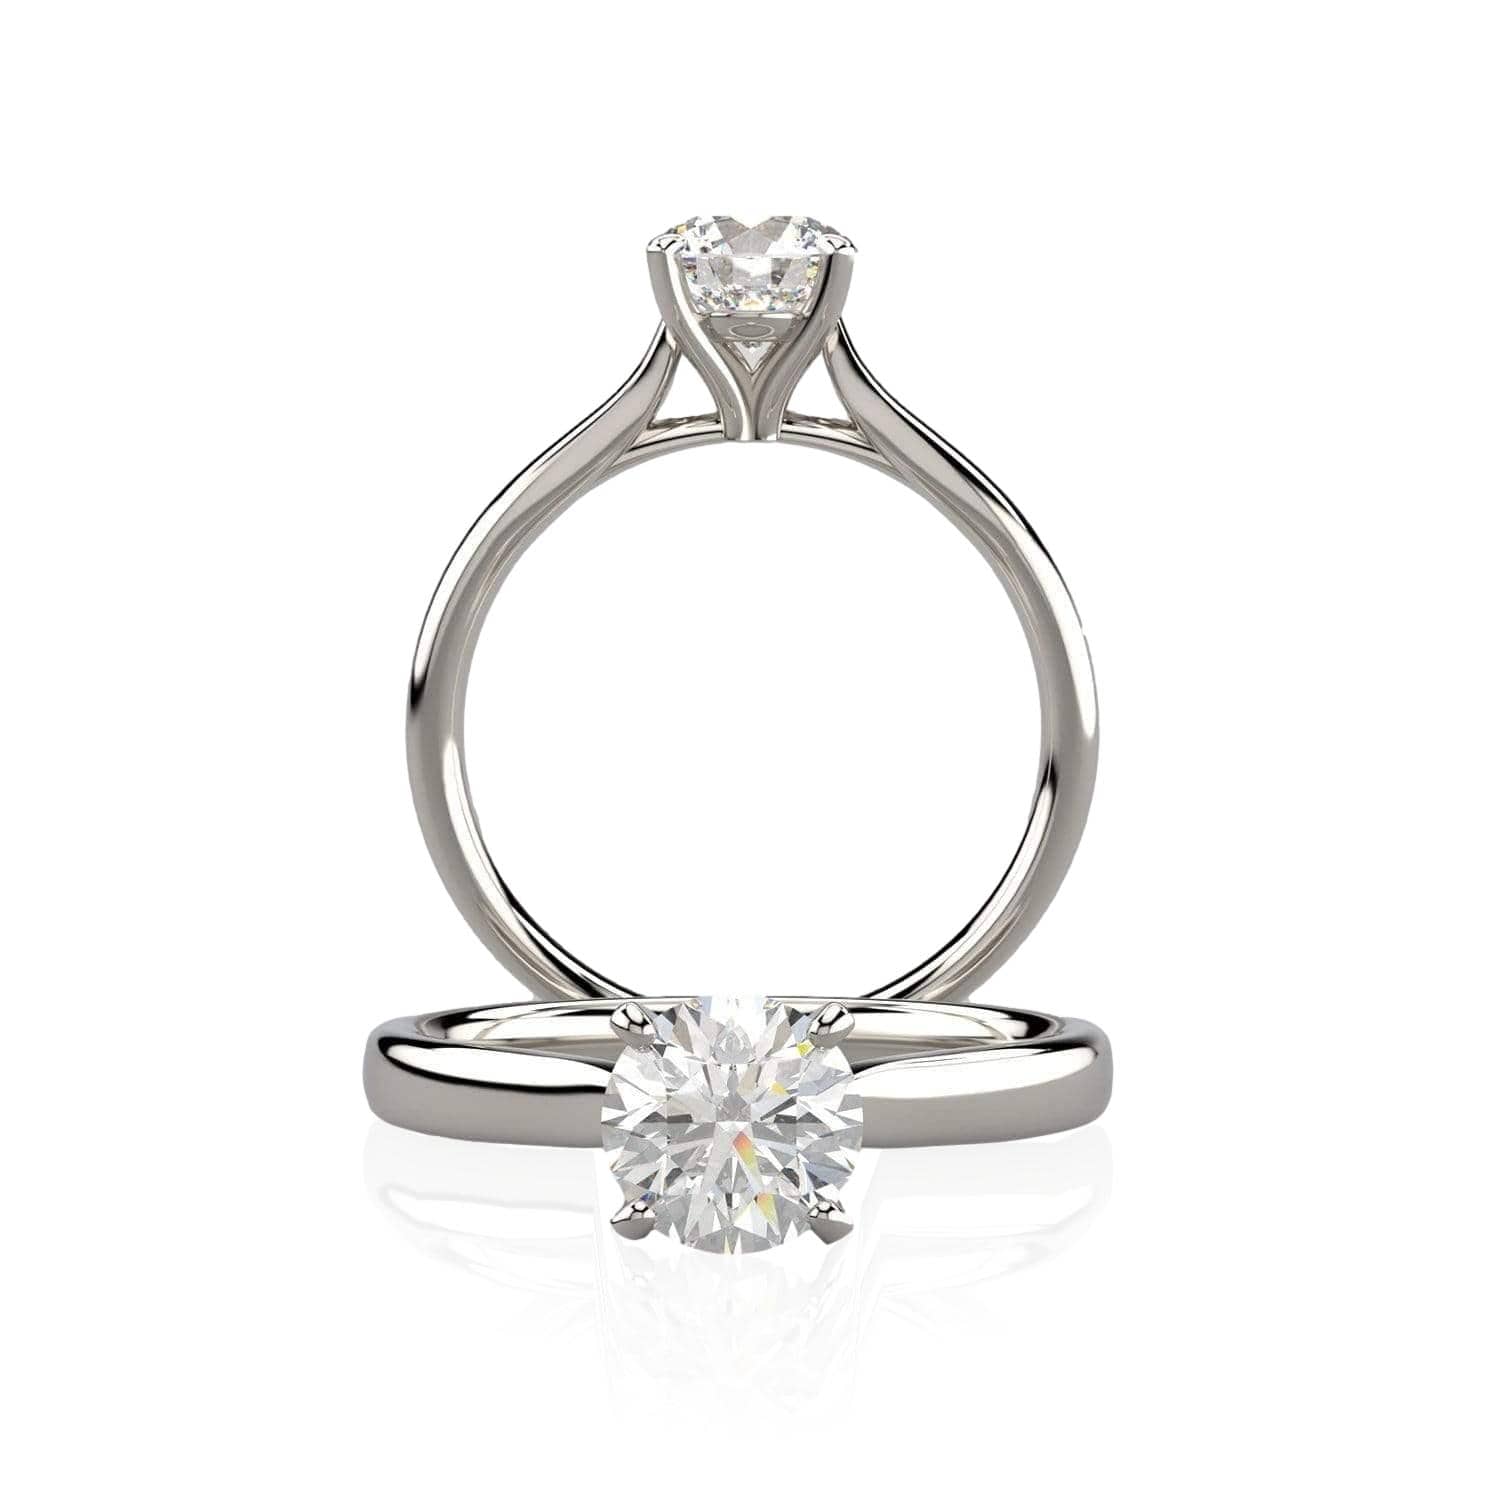 Amelia Ring- White Sapphire Prong Set Cathedral Style Solitaire Engagement Ring 6 mm/ 1.1ct White Sapphire (No Lab Report) / 14k Nickel White Gold (Not Rhodium Plated) Ring by Nodeform